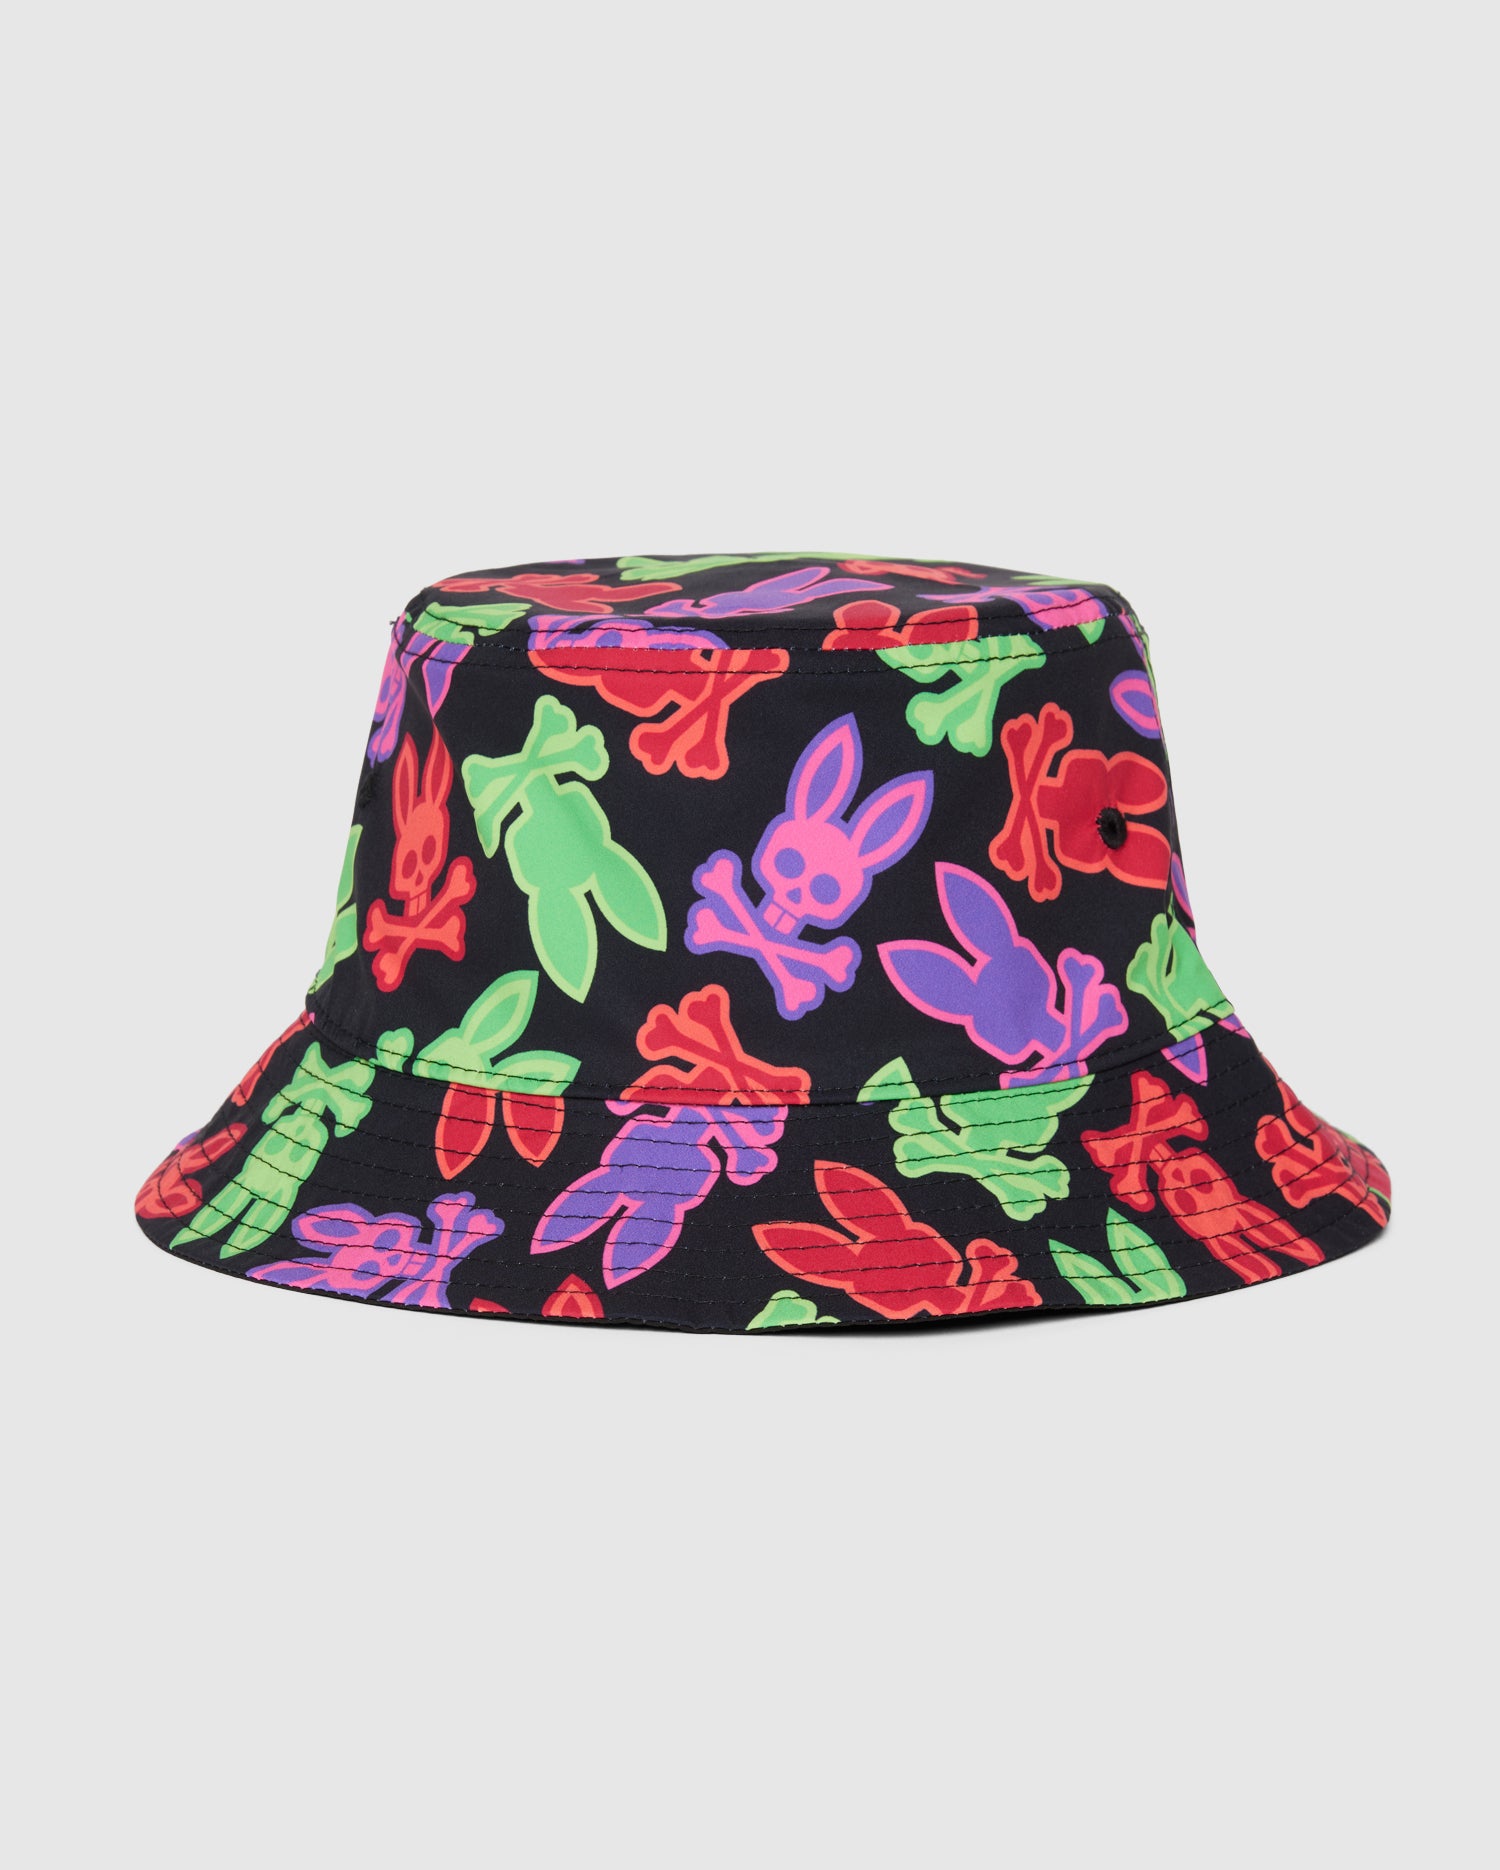 MENS ARVIN REVERSIBLE BUCKET HAT - B6A741A2HT